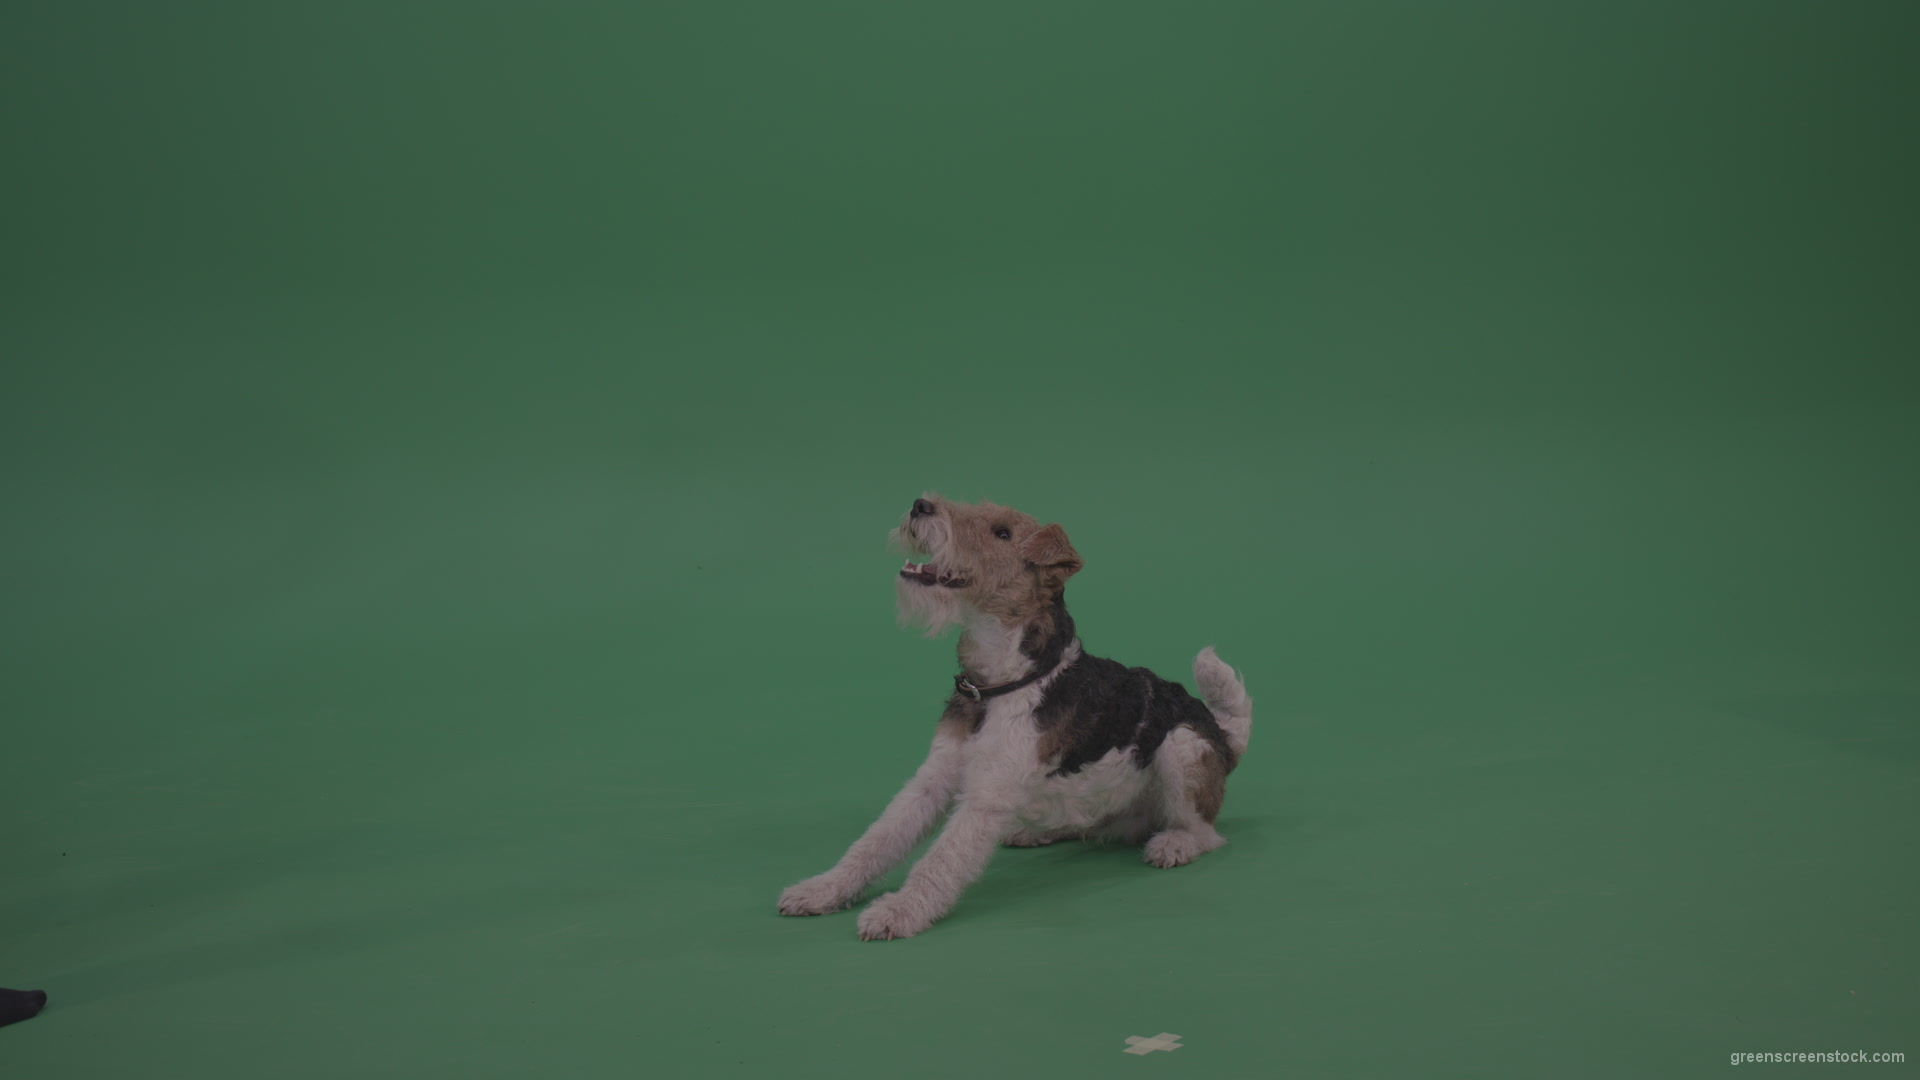 Wire-Fox-Terrier-Standing-On-Back-Feet-Ann-Serving-Then-Lies-Down-On-The-Ground-On-Green-Screen-Wall-Background_006 Green Screen Stock